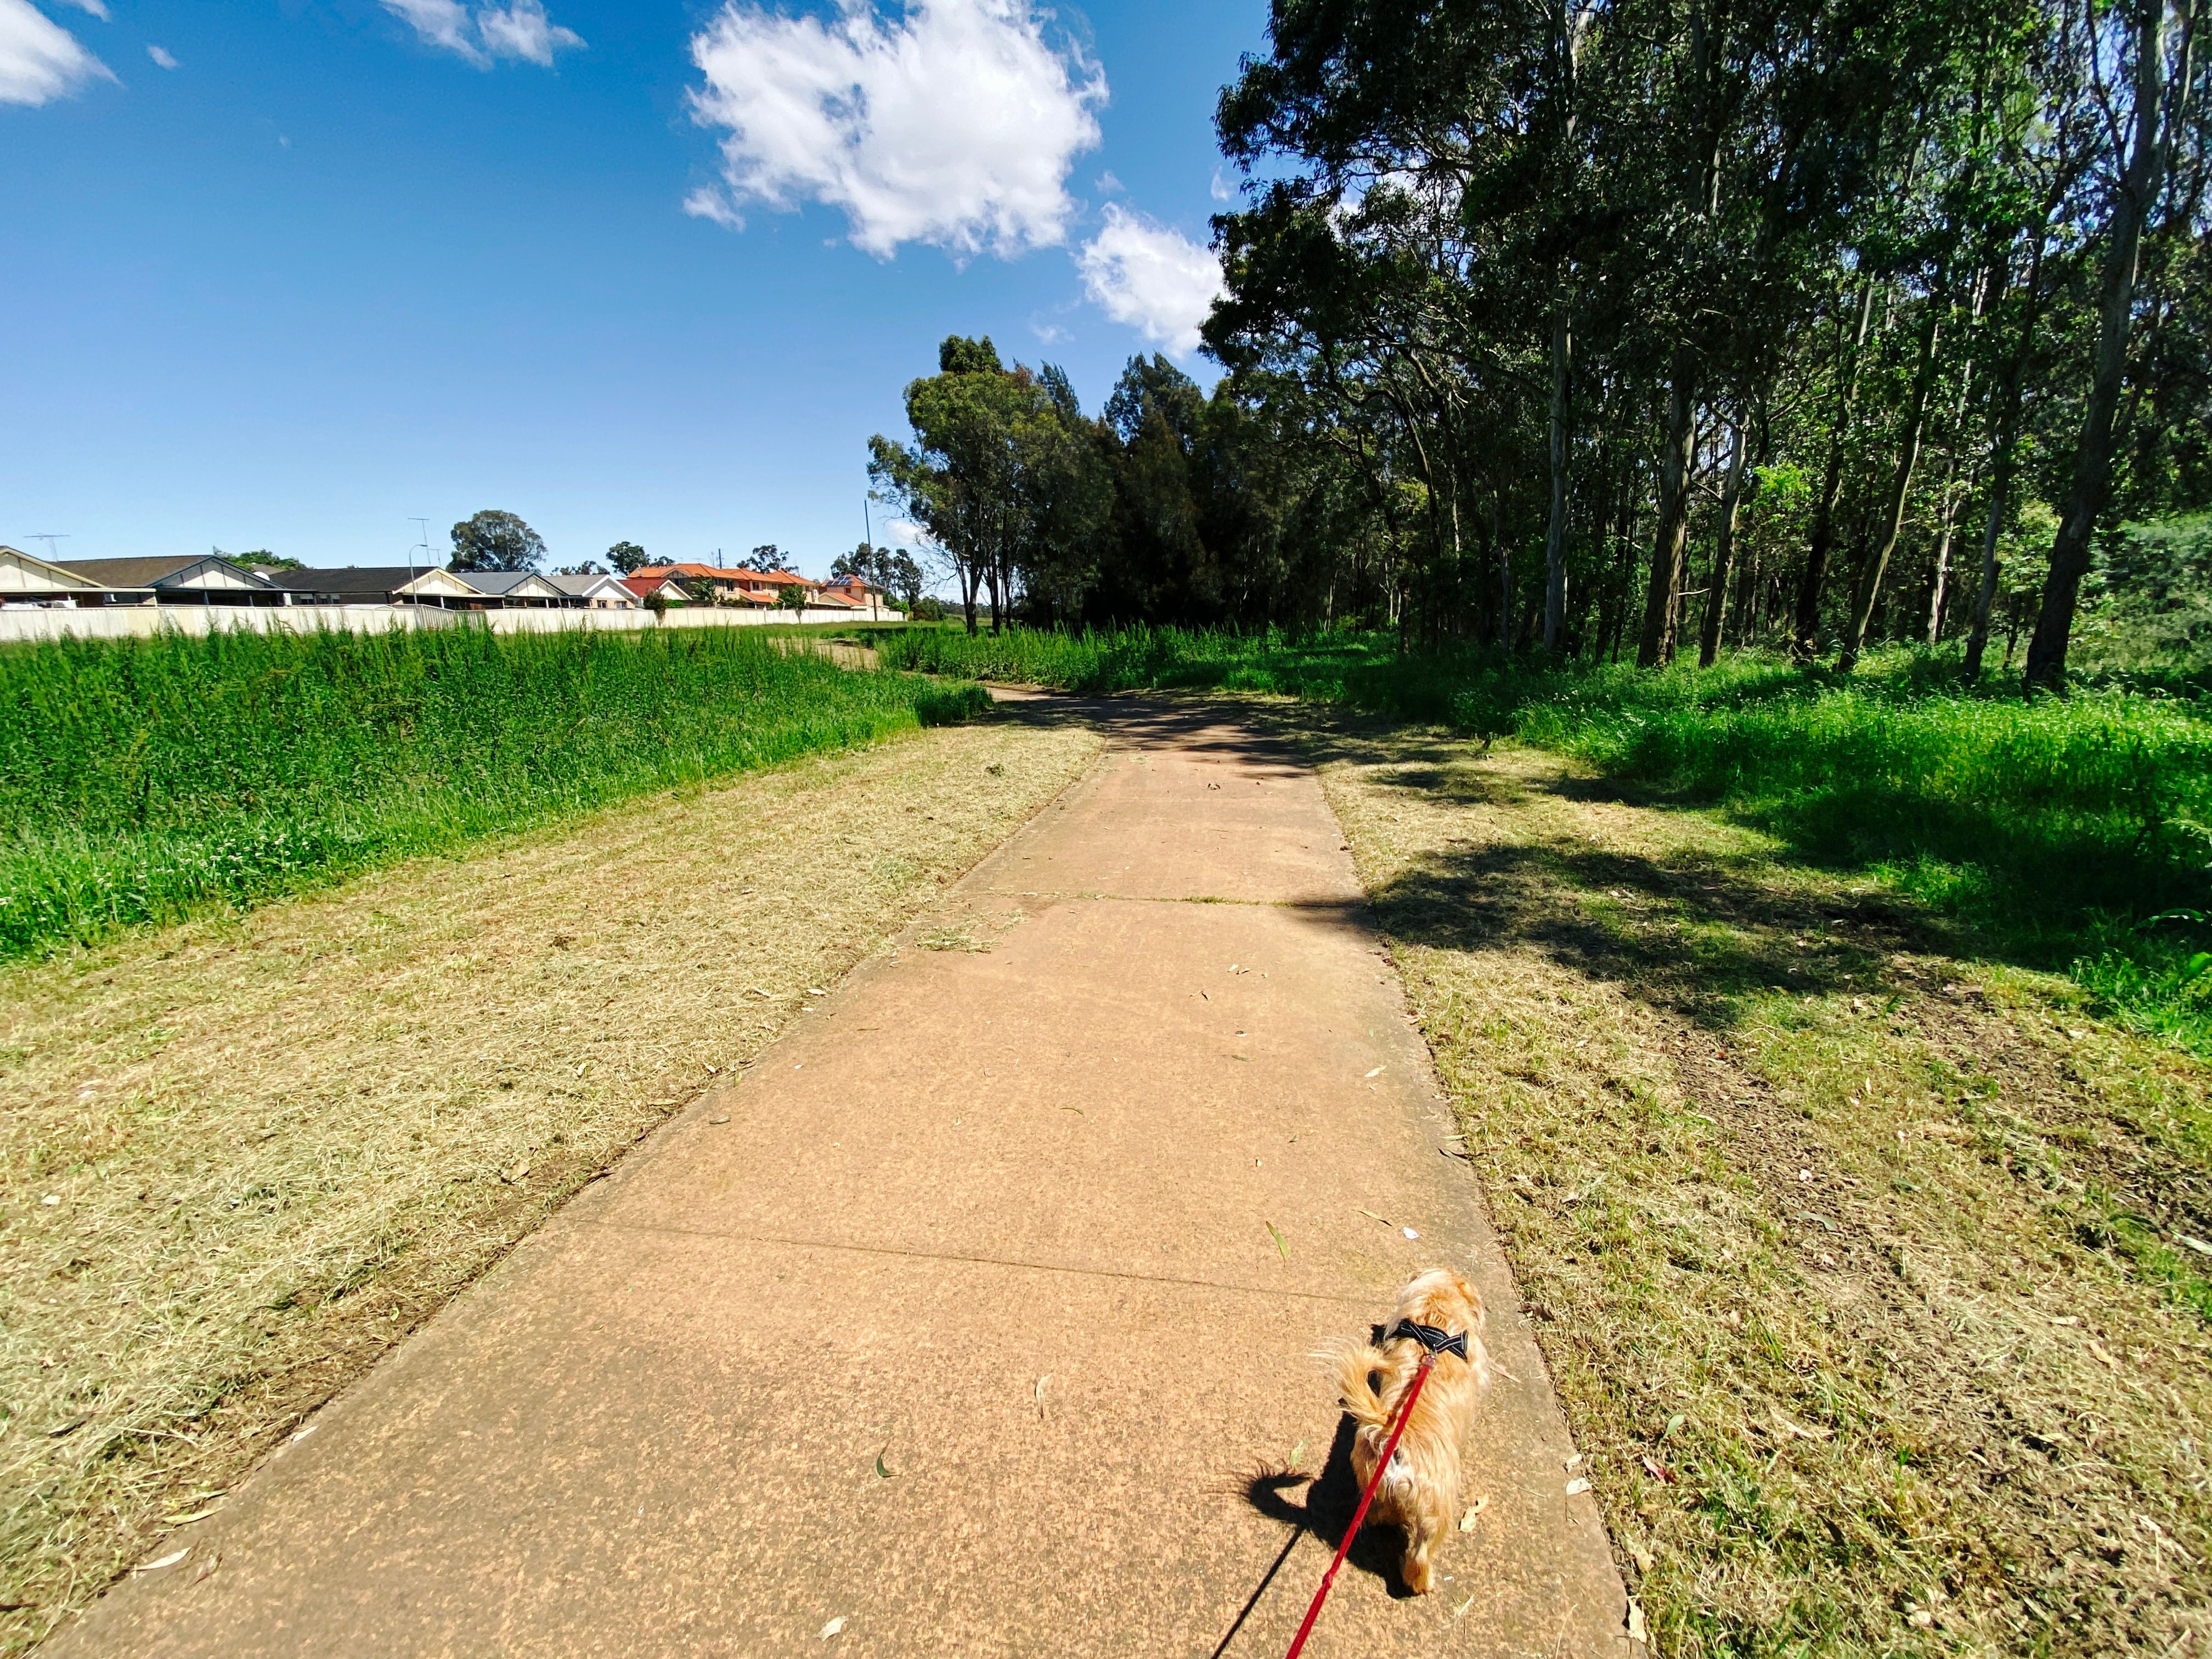 A wide-angle photo of a glorious sunny day, the sky is blue with a few fluffy clouds, looking down a path with trees on one side, and a small scruffy blonde dog trotting along on the end of a lead.